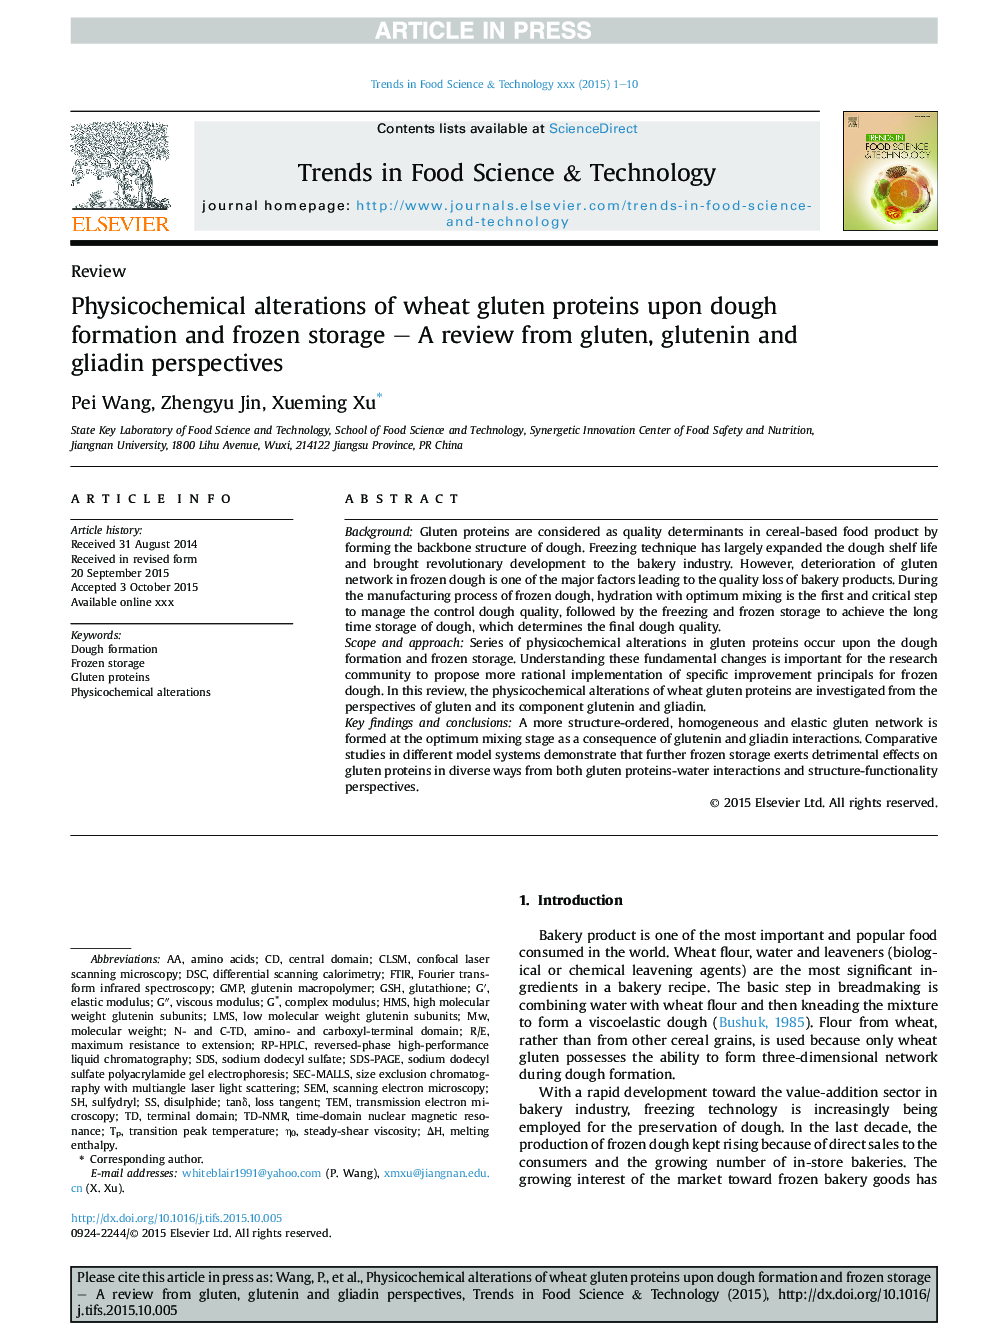 Physicochemical alterations of wheat gluten proteins upon dough formation and frozen storage - A review from gluten, glutenin and gliadin perspectives